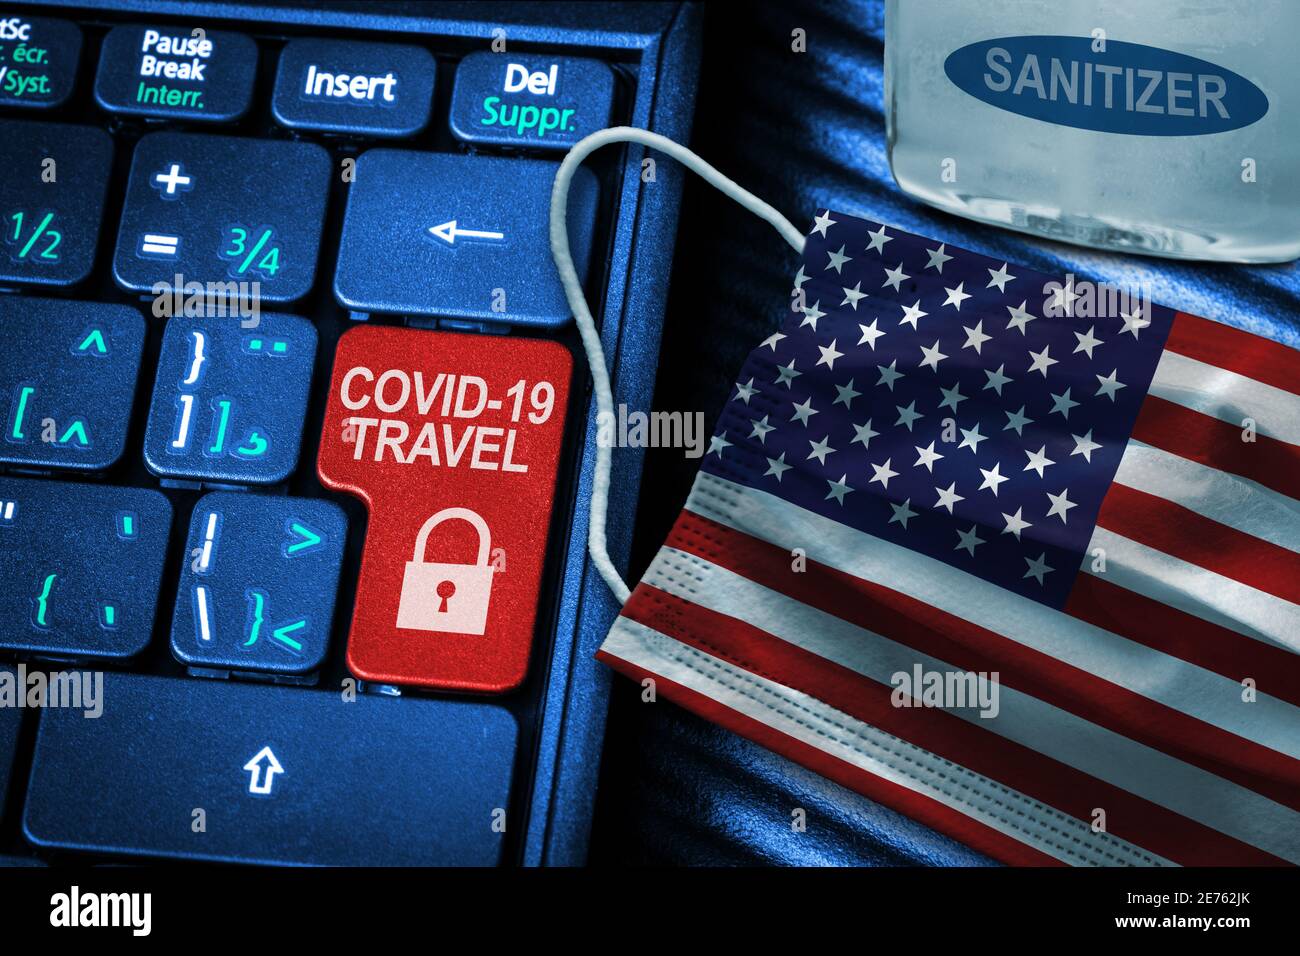 US COVID-19 coronavirus travel restrictions concept showing red button warning on keyboard with American flag face mask and hand sanitizer. New normal Stock Photo